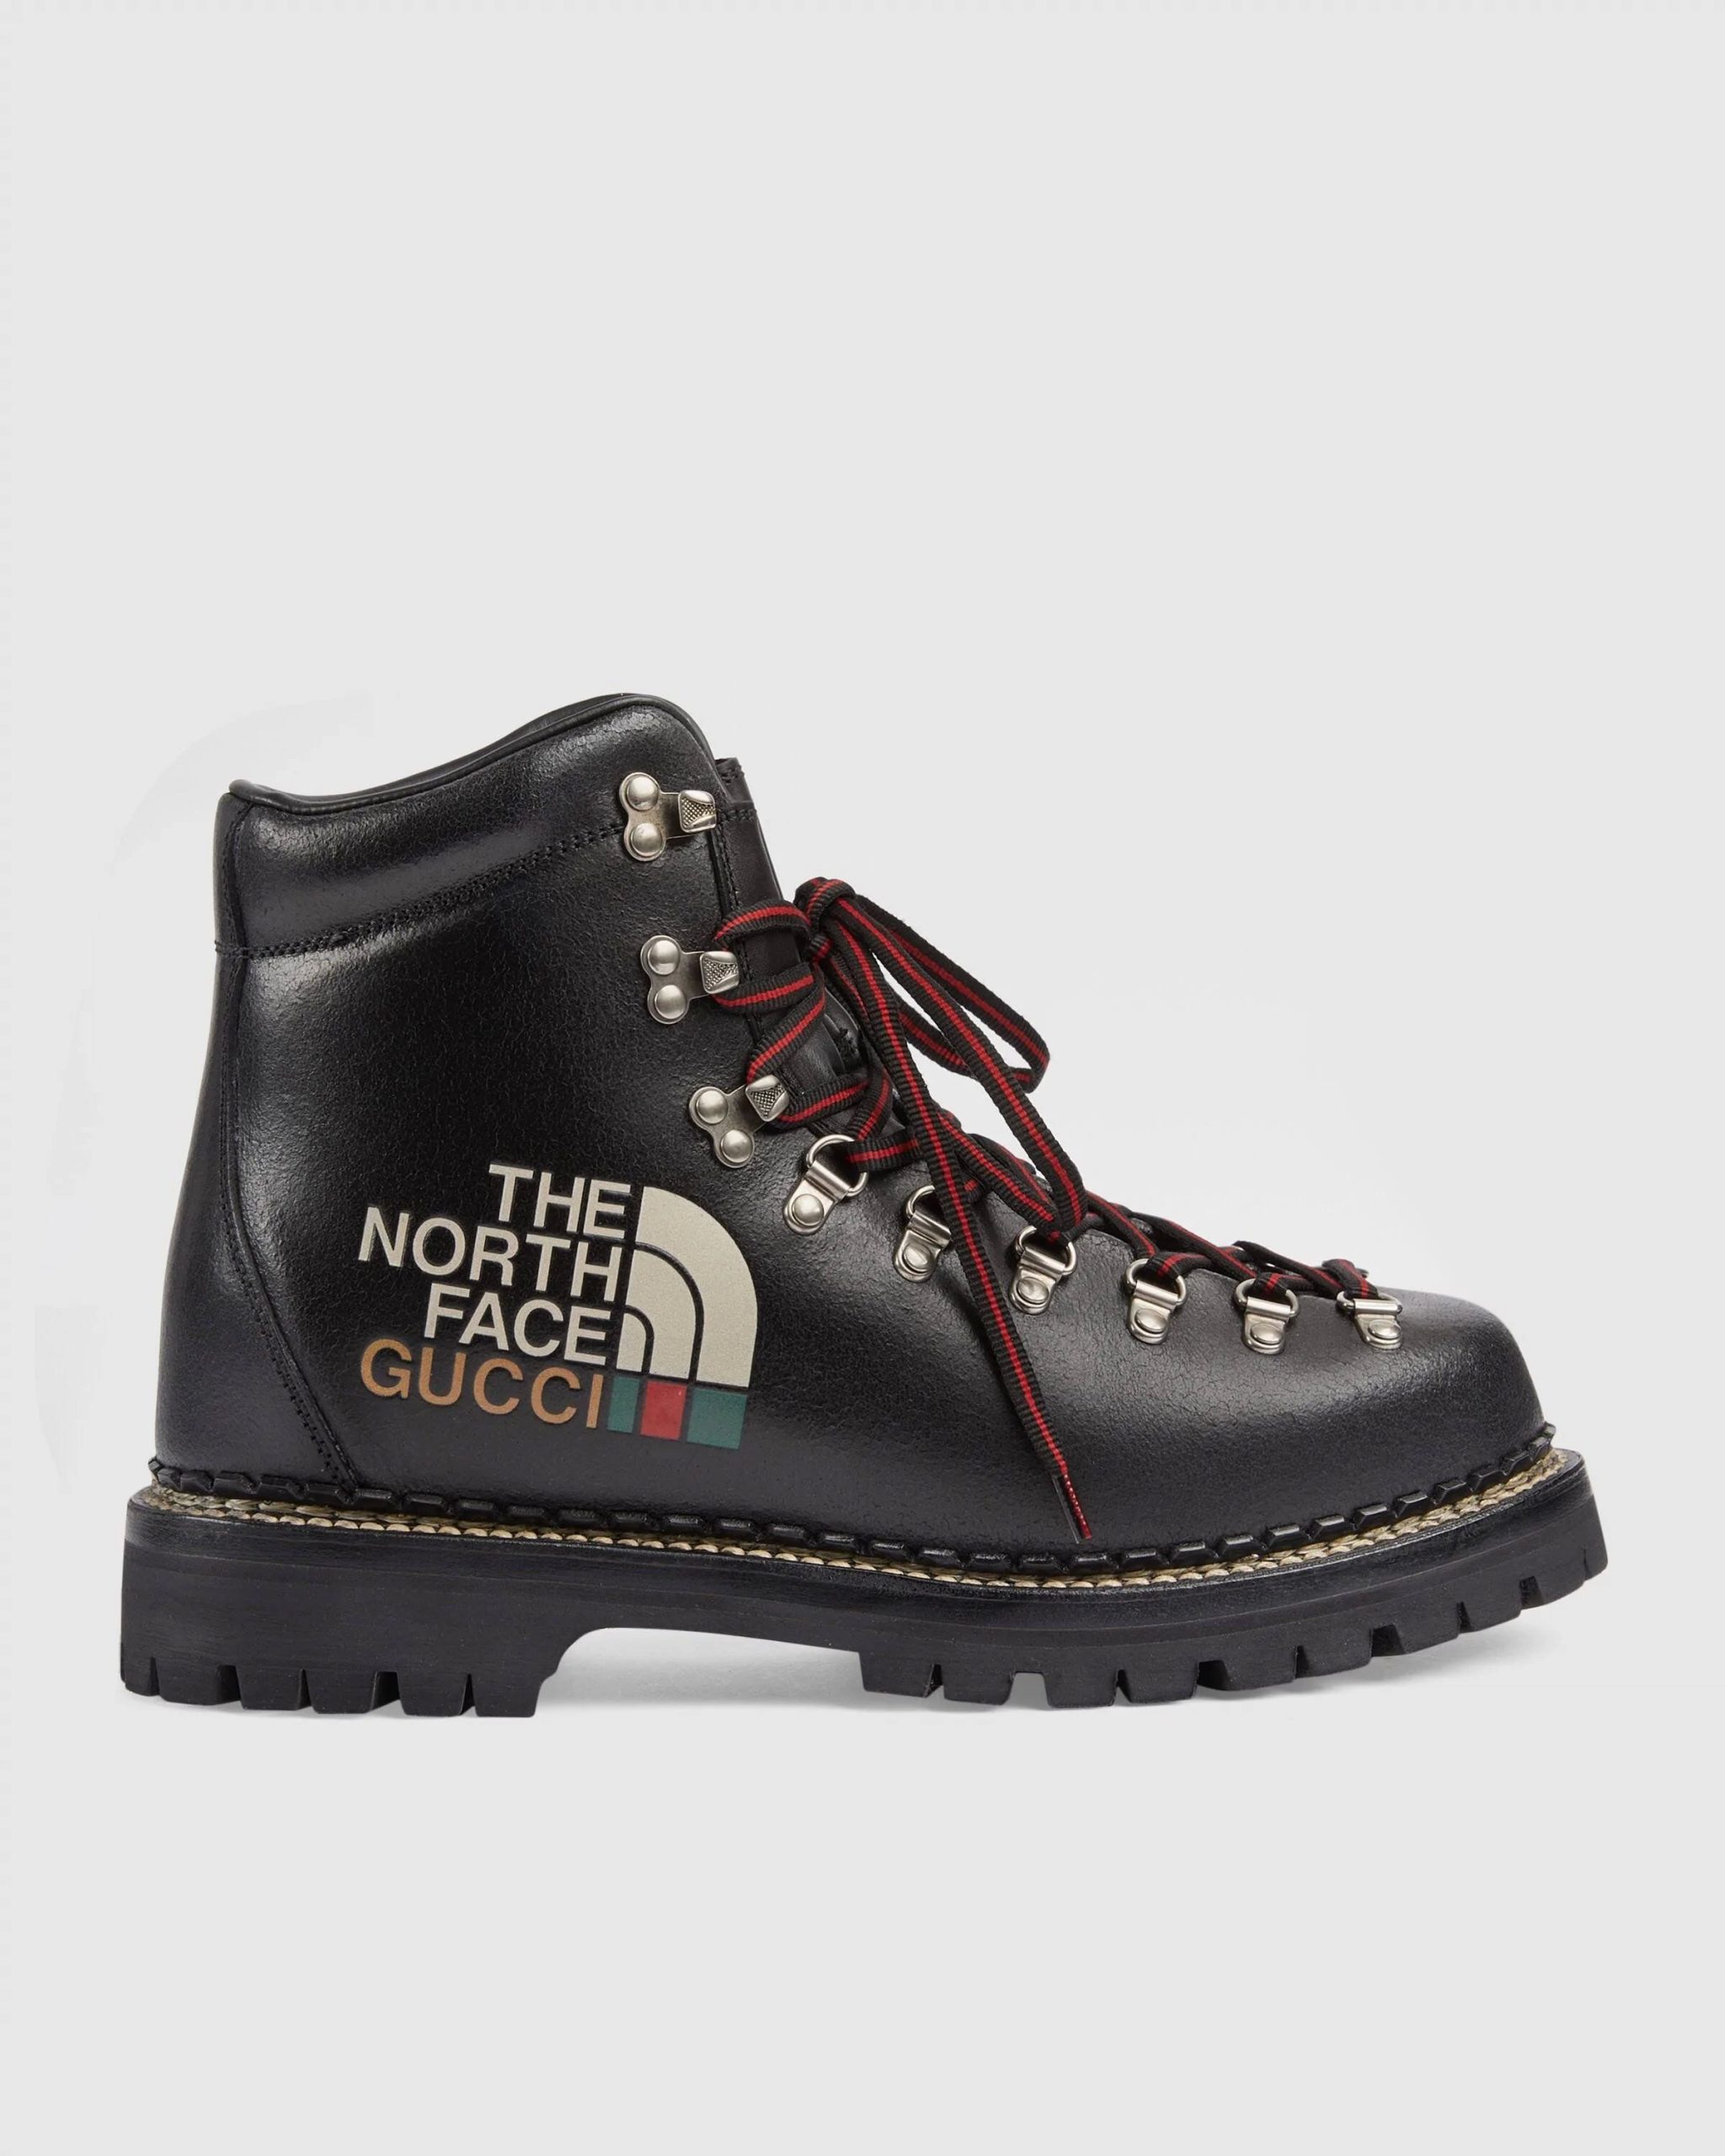 The North Face x Gucci Men's Ankle Boot